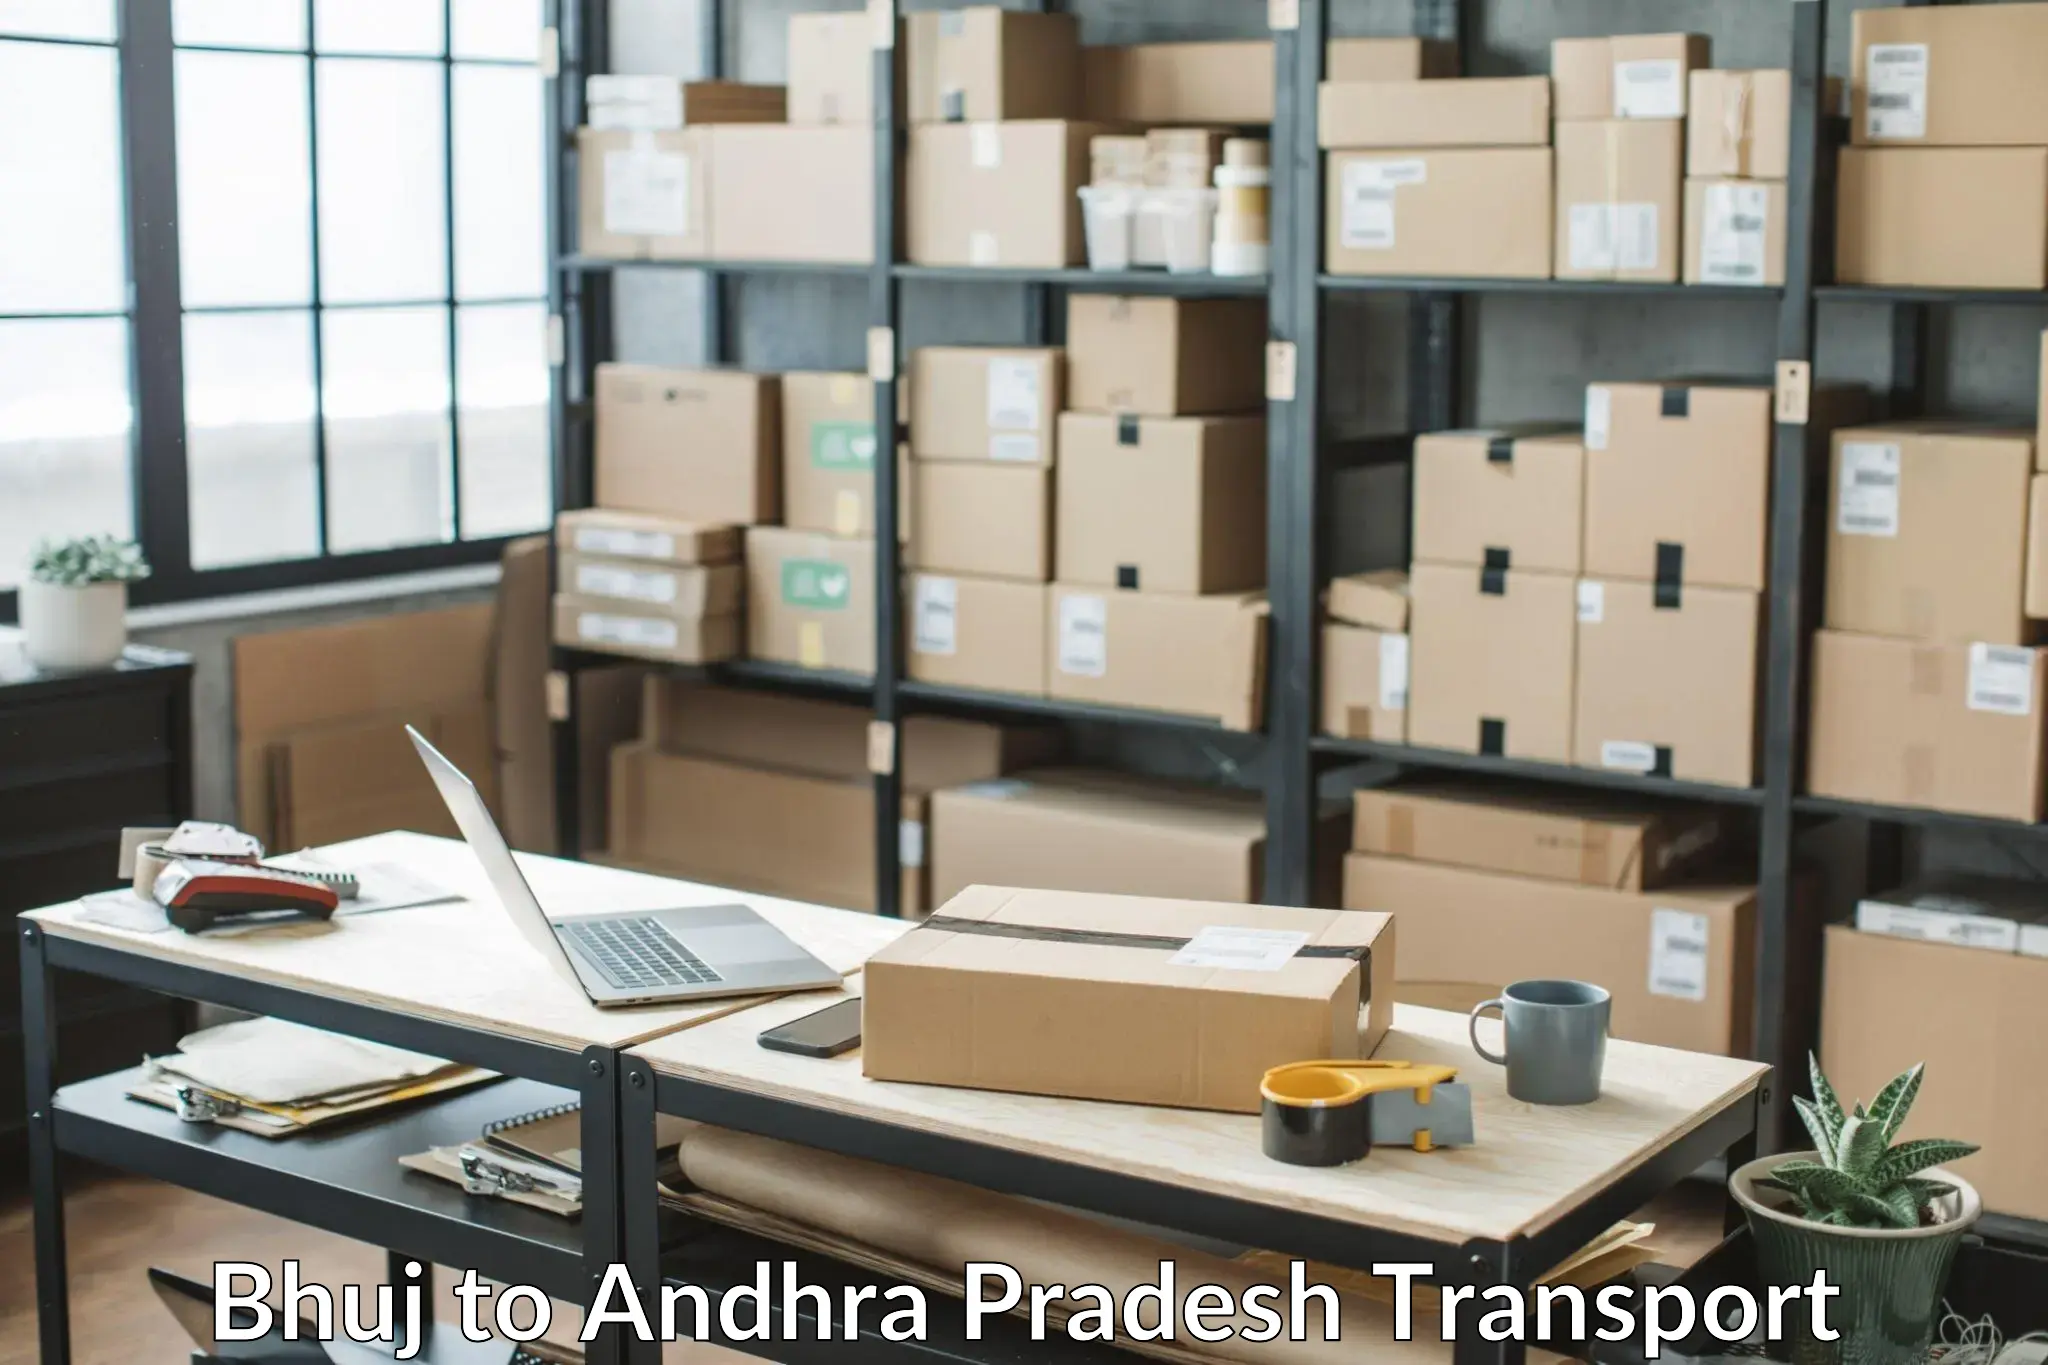 Daily parcel service transport in Bhuj to Kurnool